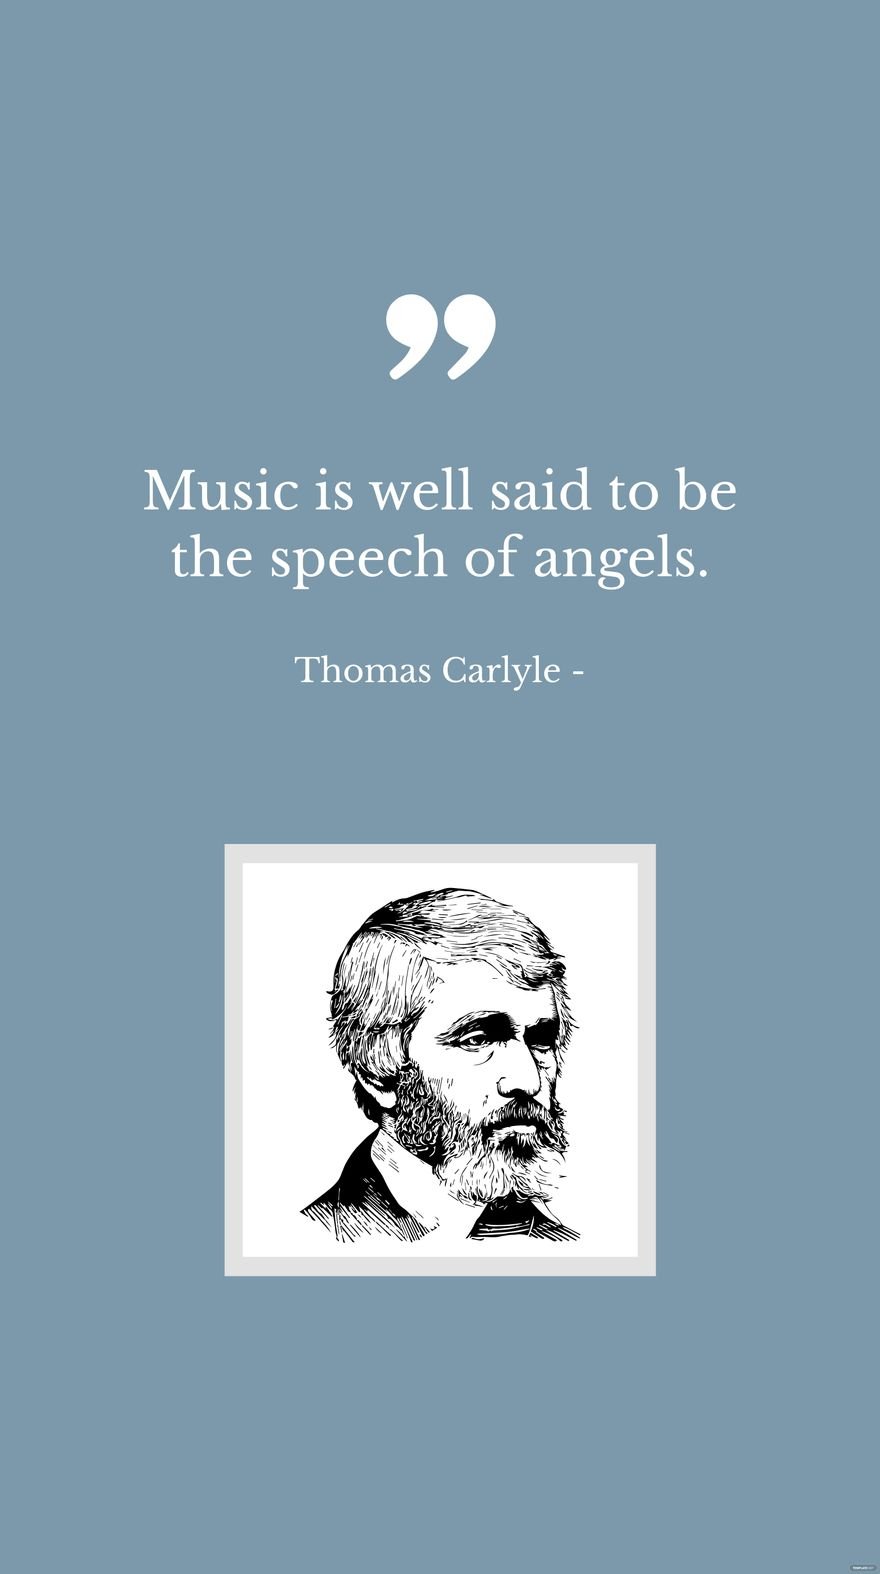 Thomas Carlyle - Music is well said to be the speech of angels.